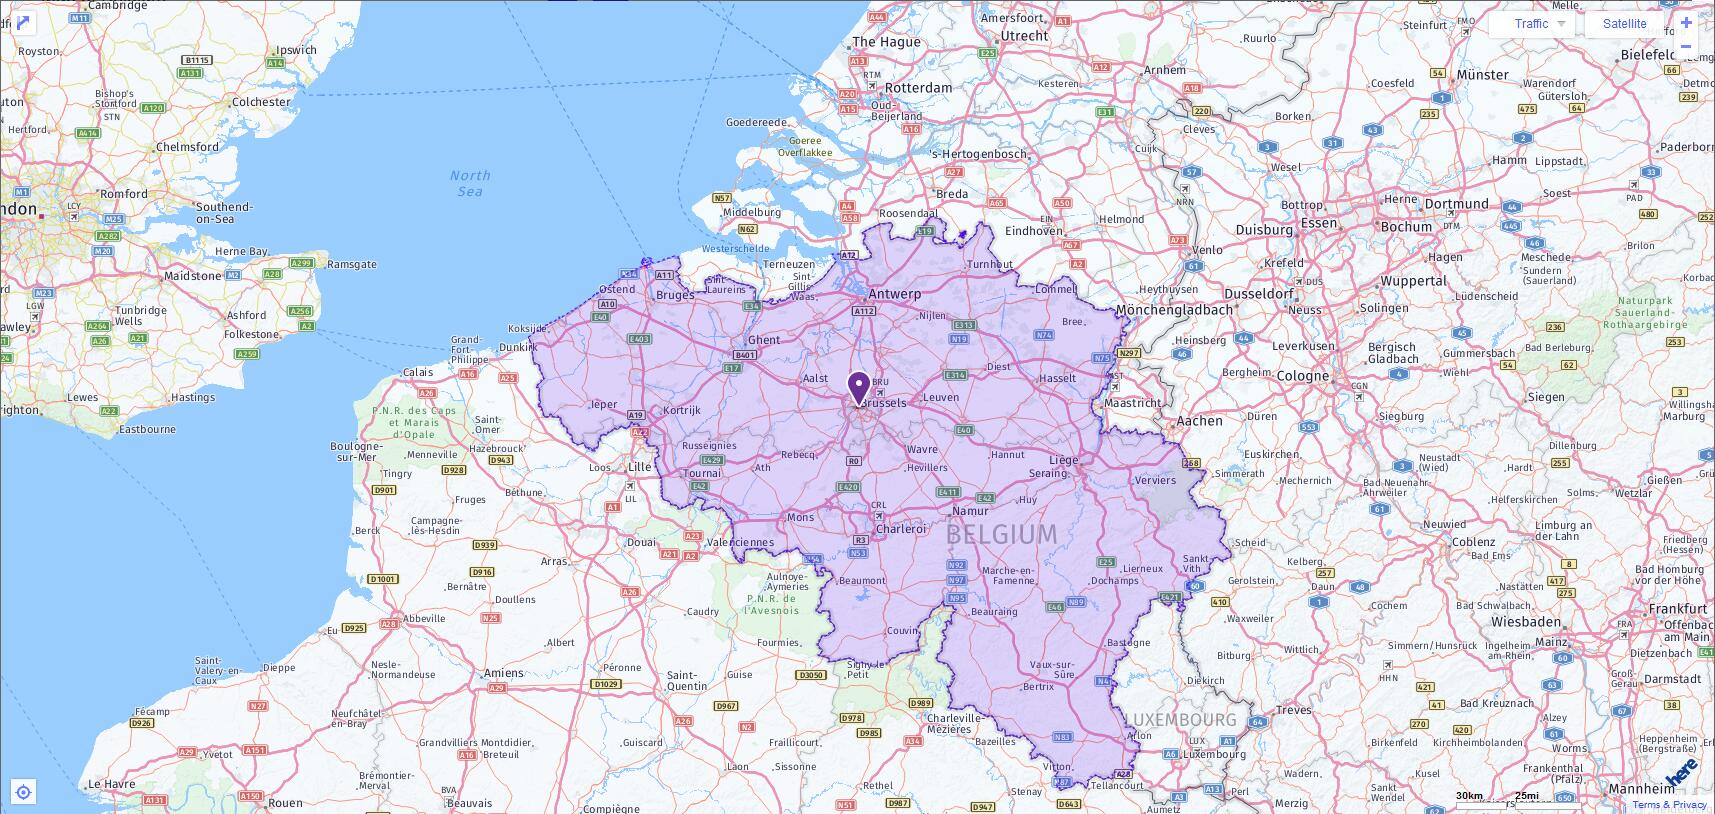 ACT Test Centers and Dates in Belgium